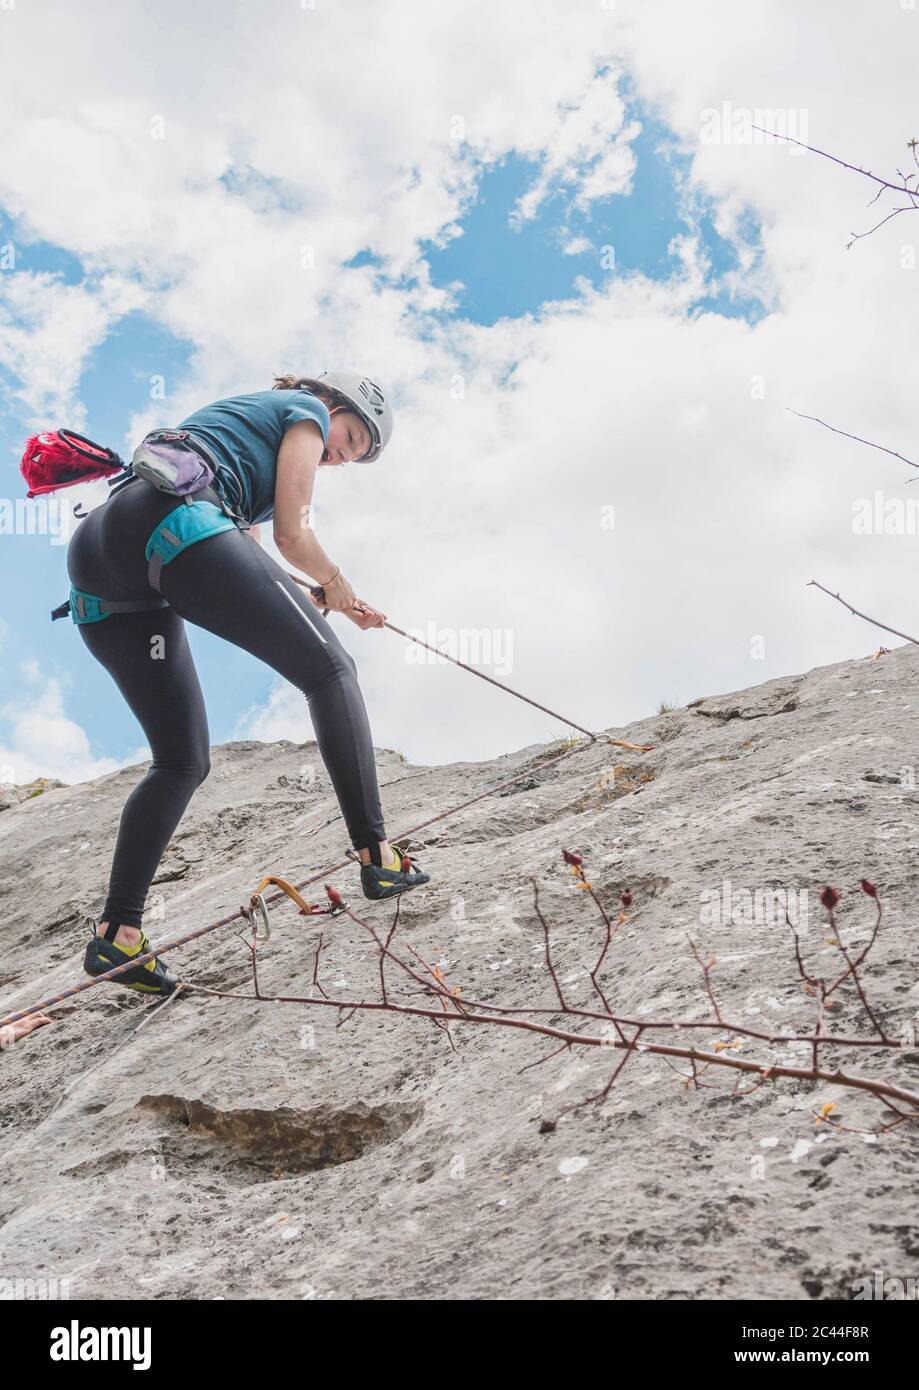 Young woman rappelling down with rope on rock against sky Stock Photo